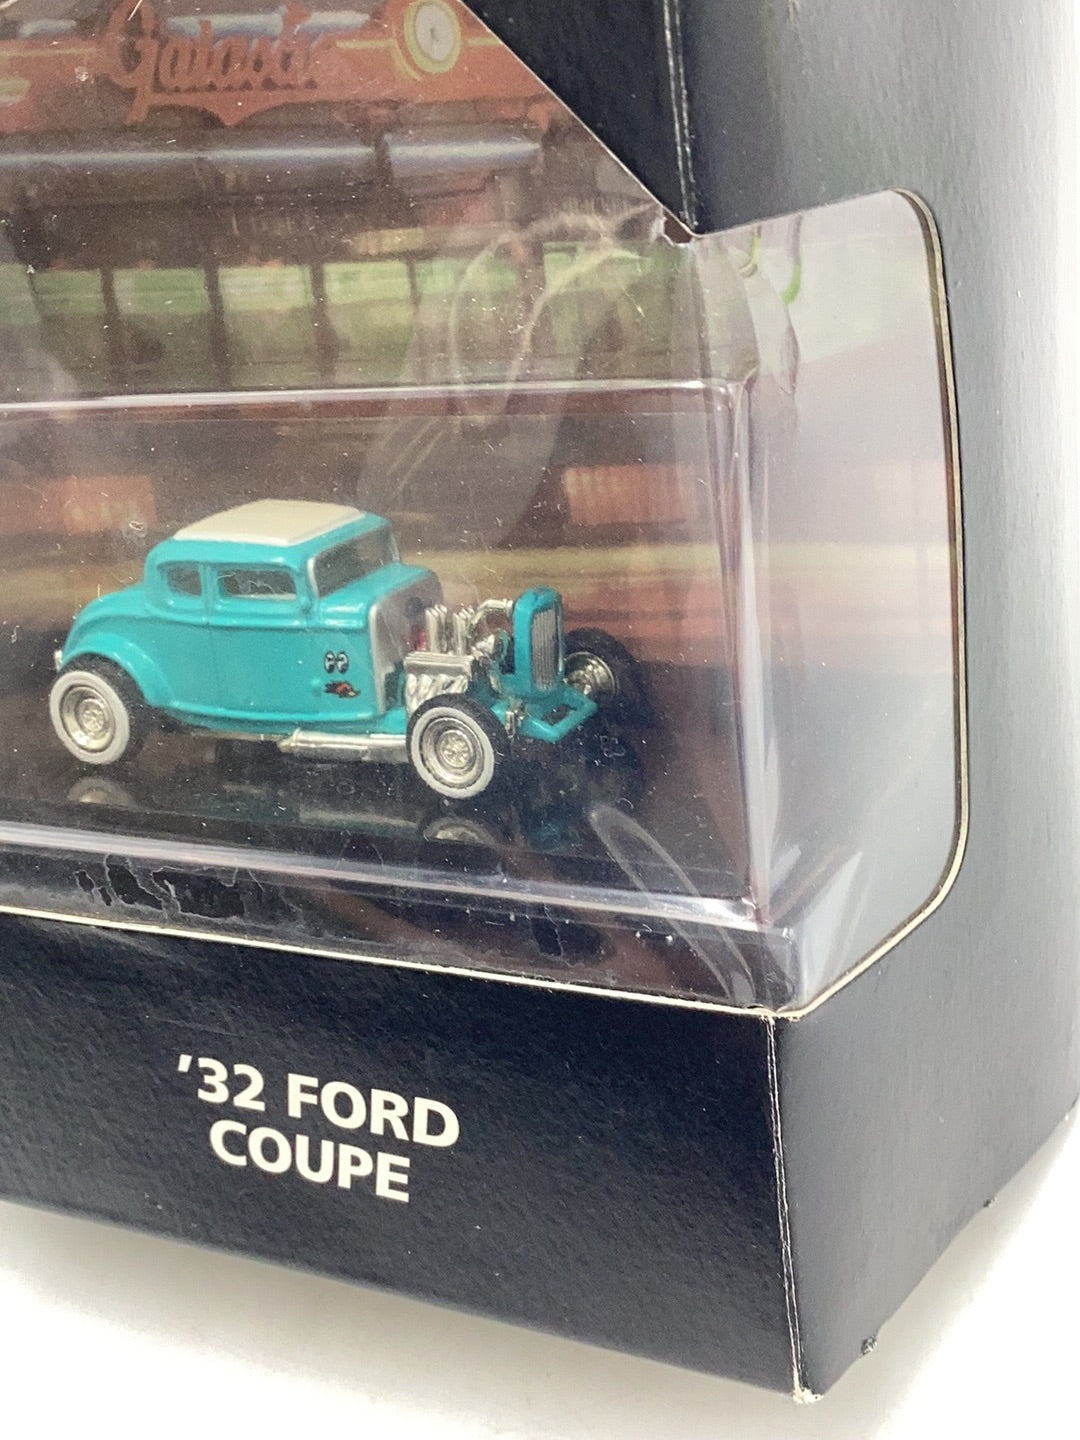 Hot Wheels Collectibles 32 Ford Coupe #8814